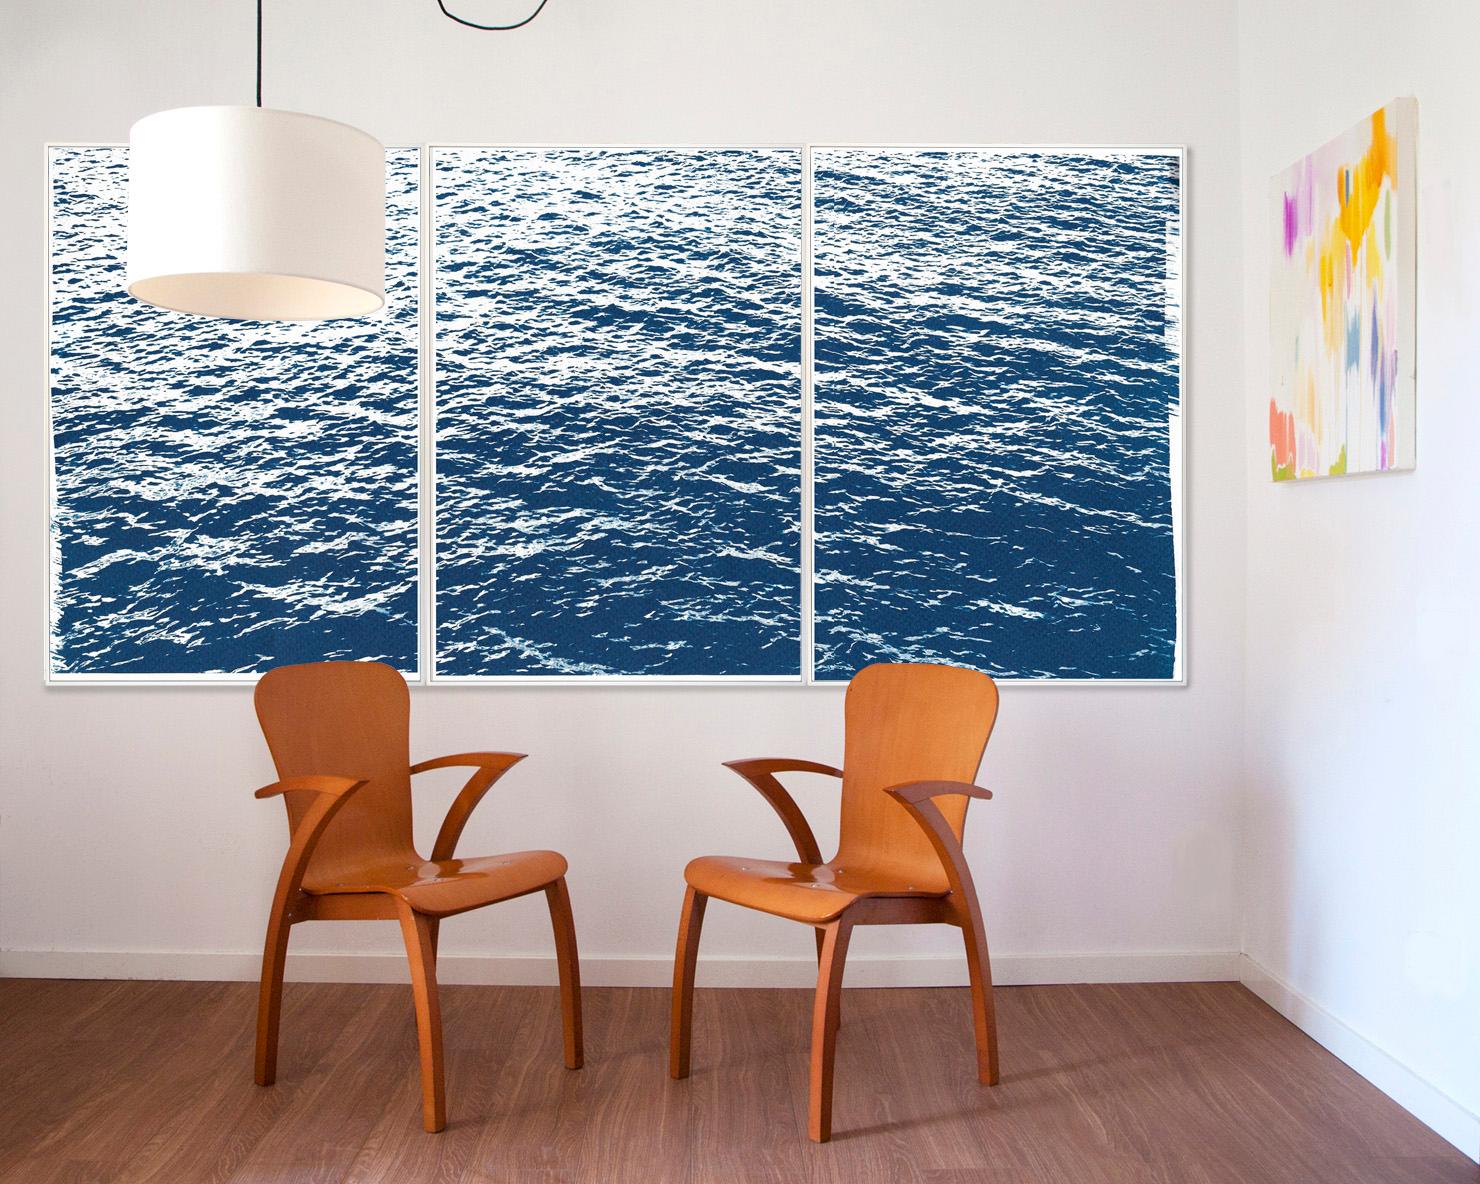 Bright Seascape in Capri, Navy Cyanotype Triptych 100x210 cm, Edition of 20 - Print by Kind of Cyan